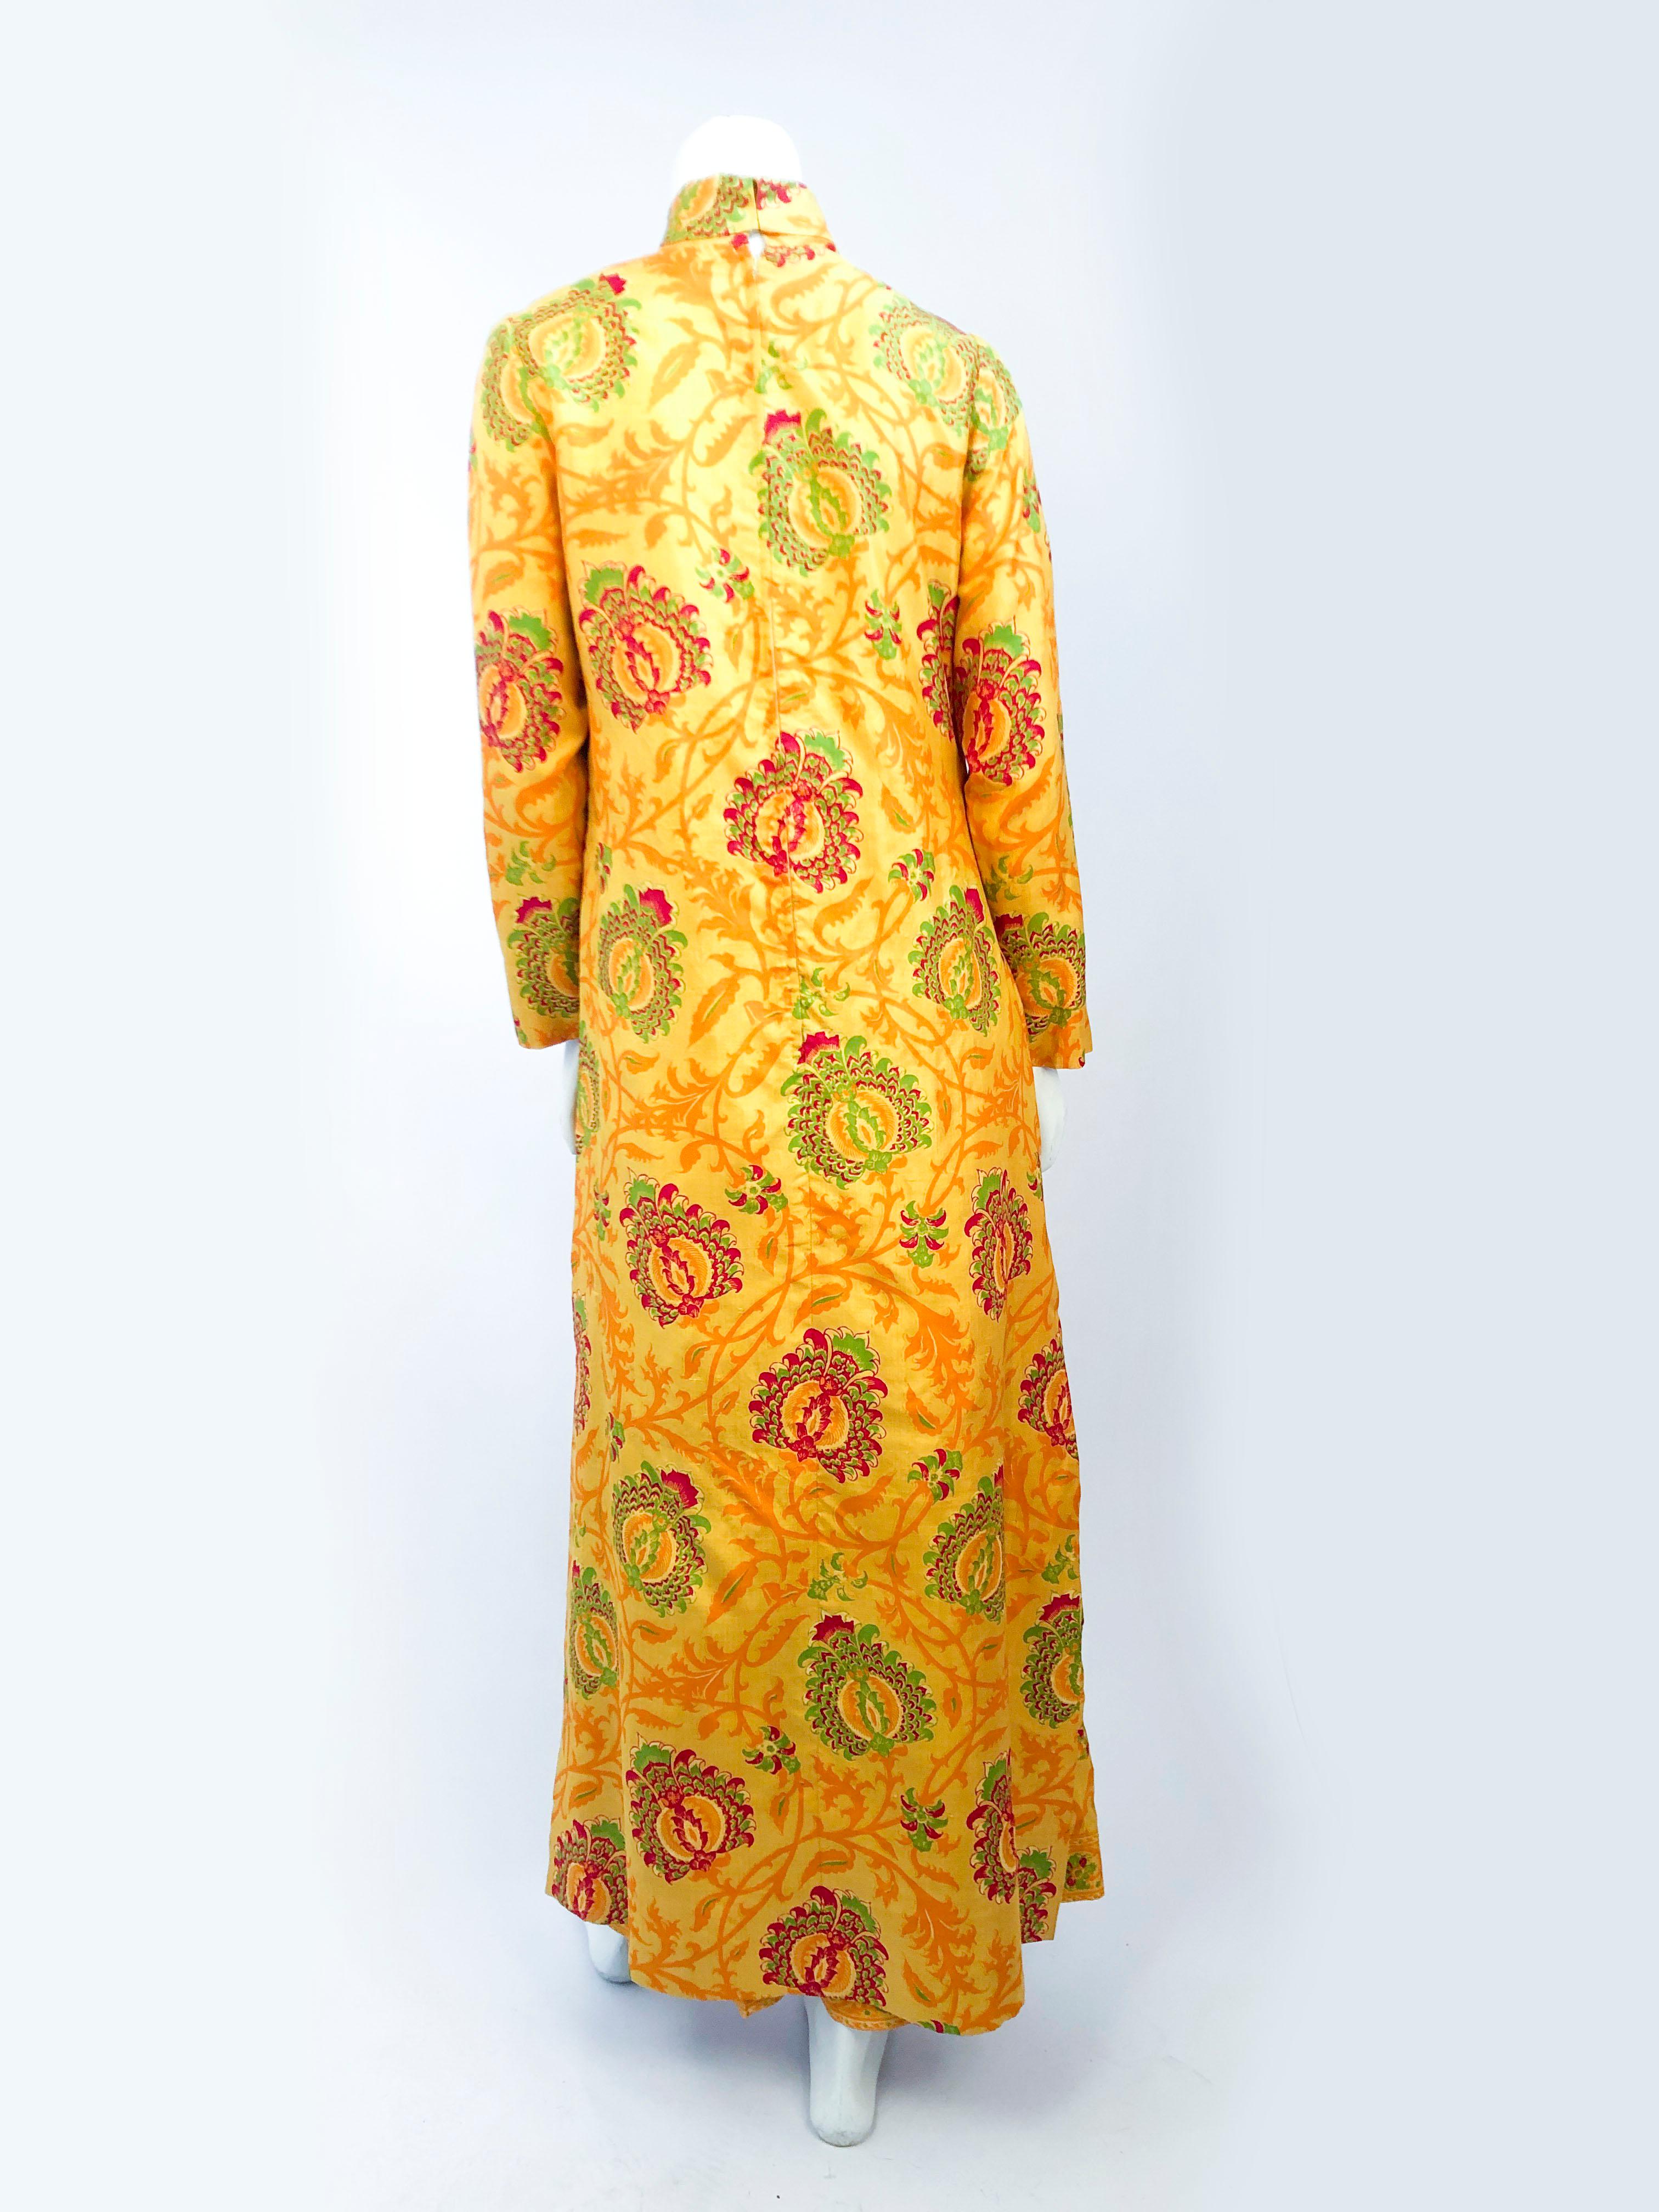 Orange 1960s Gump's Thai Printed Silk Tunic with Matching Pants For Sale